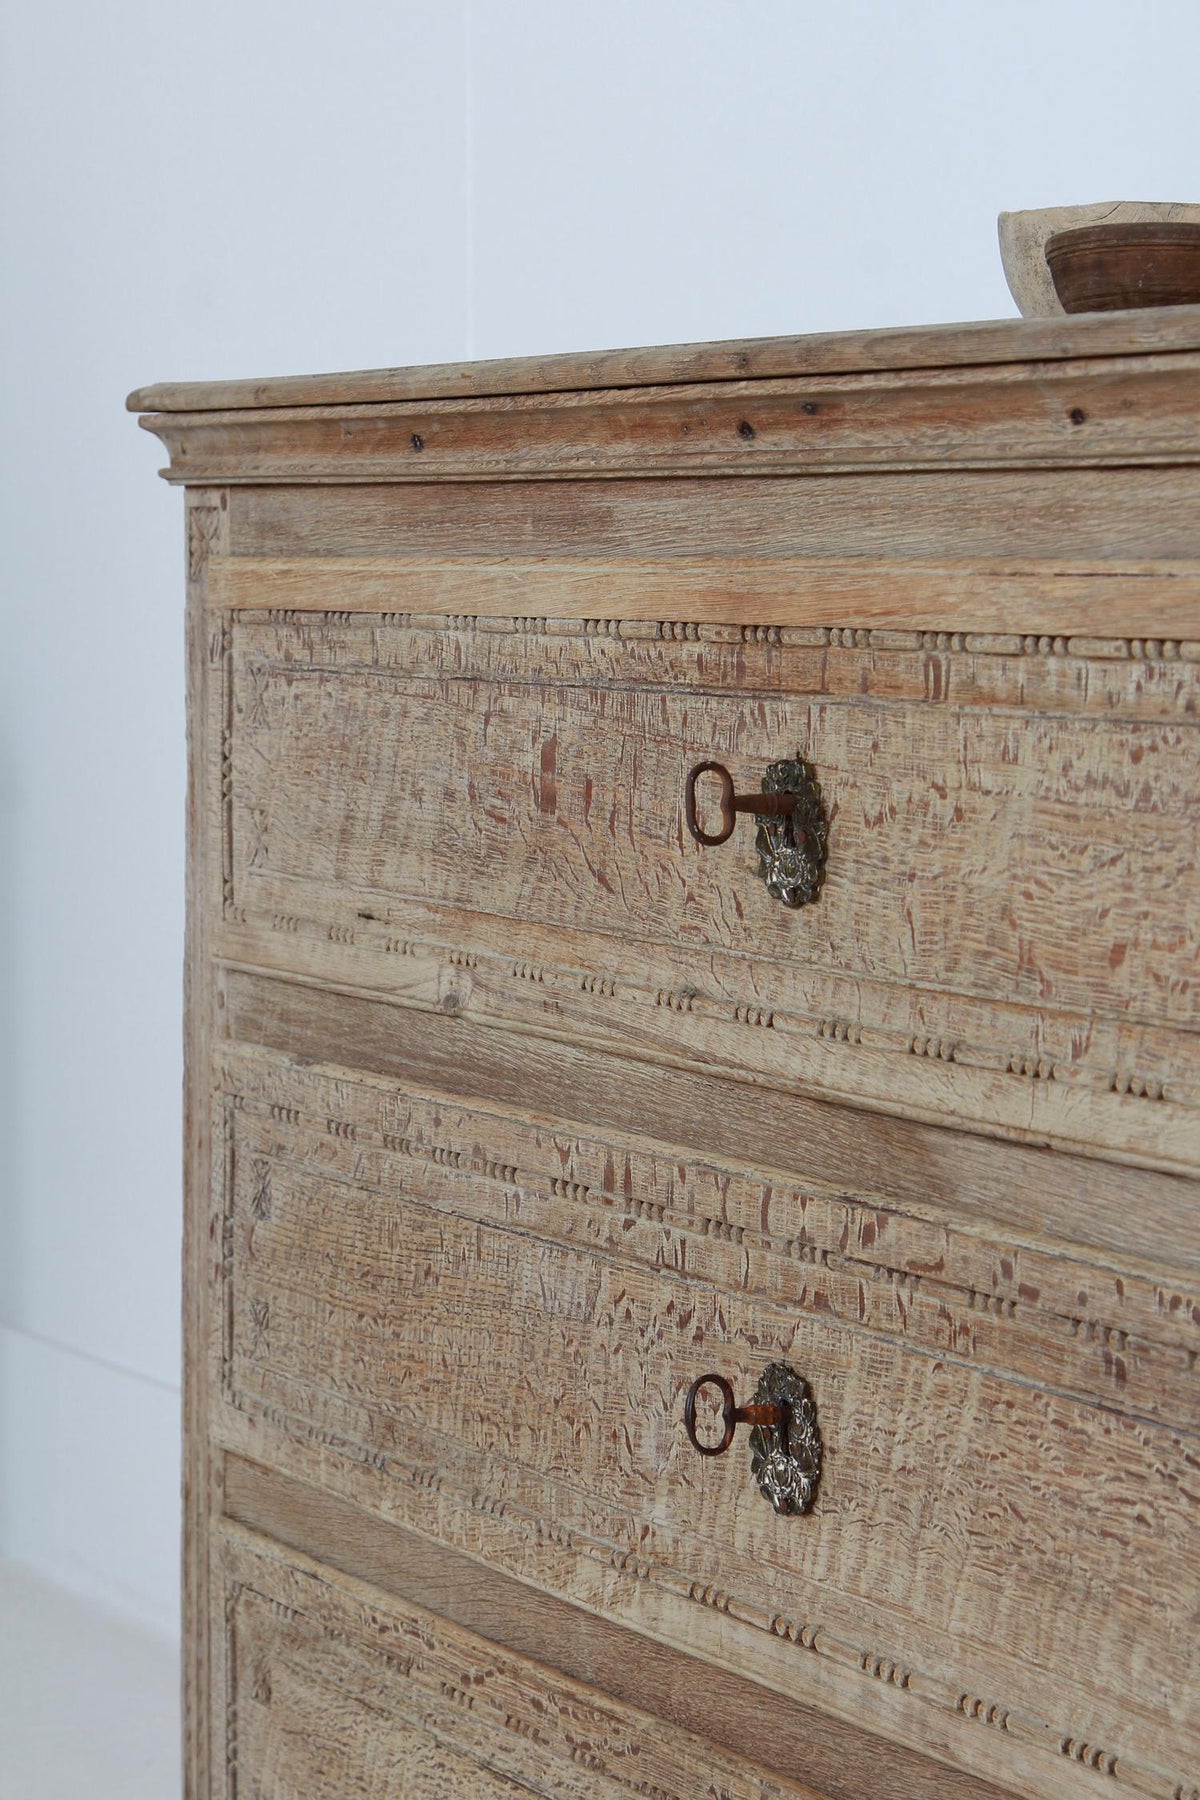 Handsome French 19thC Bleached Oak Three -Drawer Commode